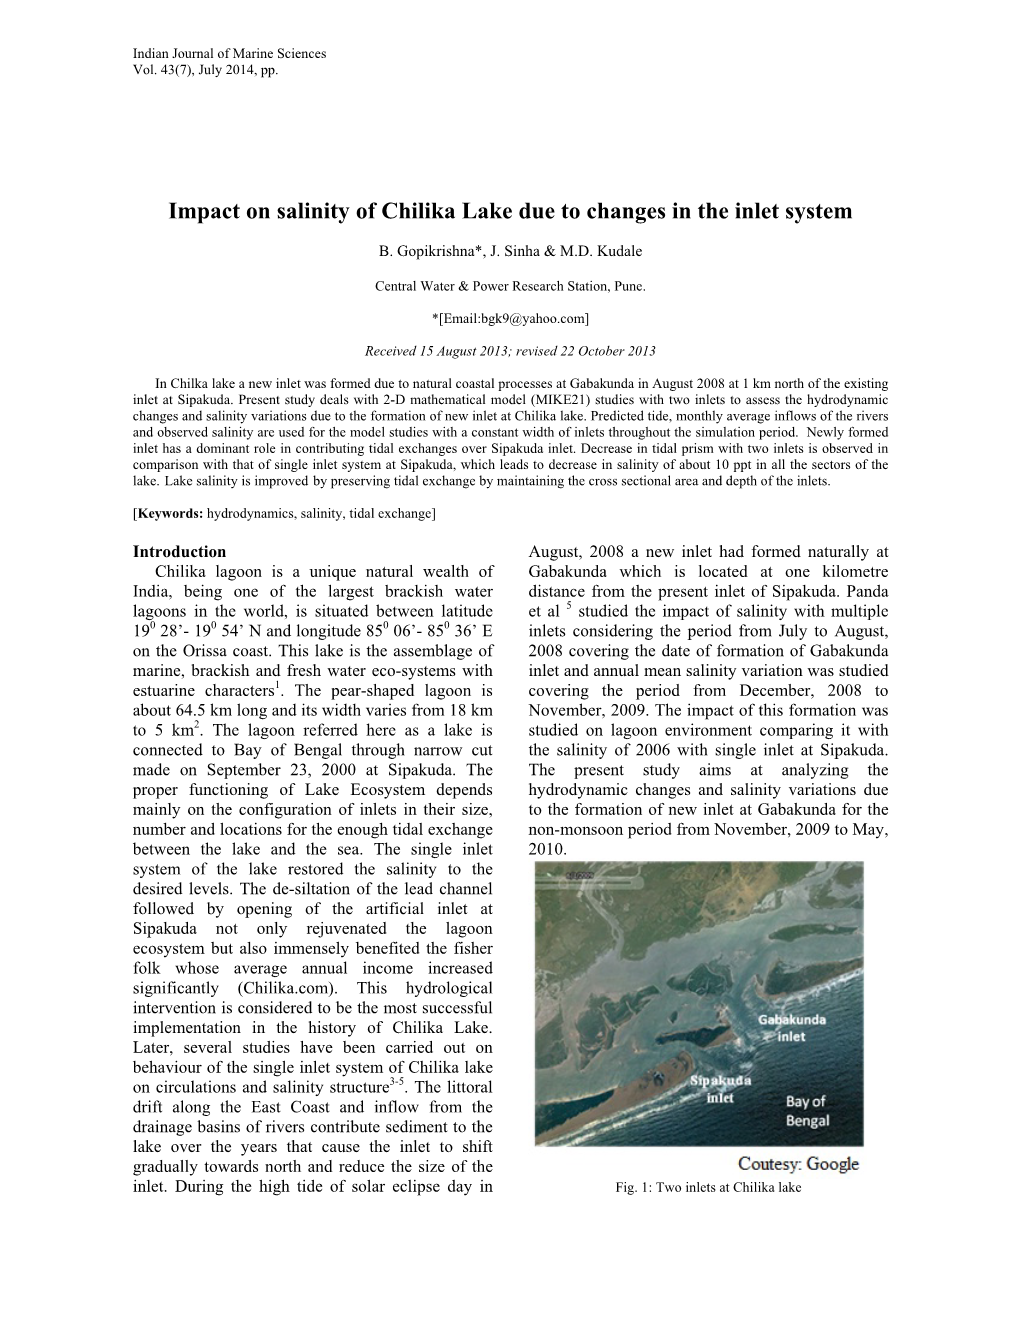 Impact on Salinity of Chilika Lake Due to Changes in the Inlet System